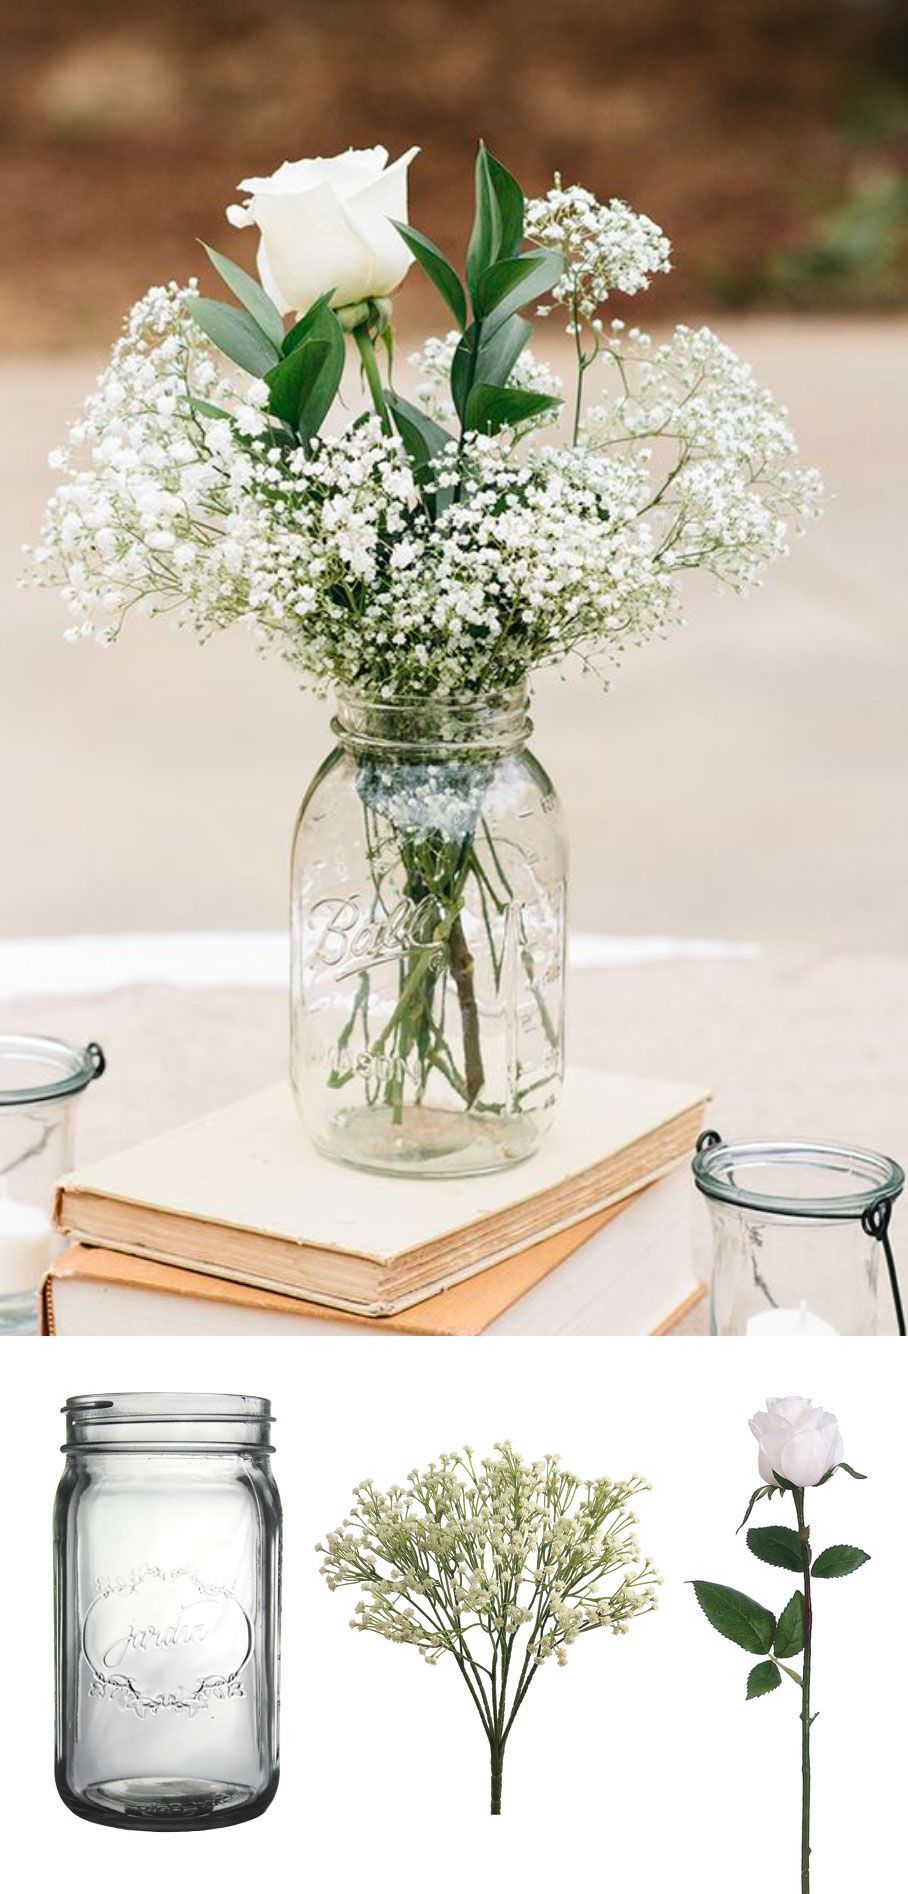 Turn your favorite fresh flower inspiration into a long-lasting faux centerpiece…